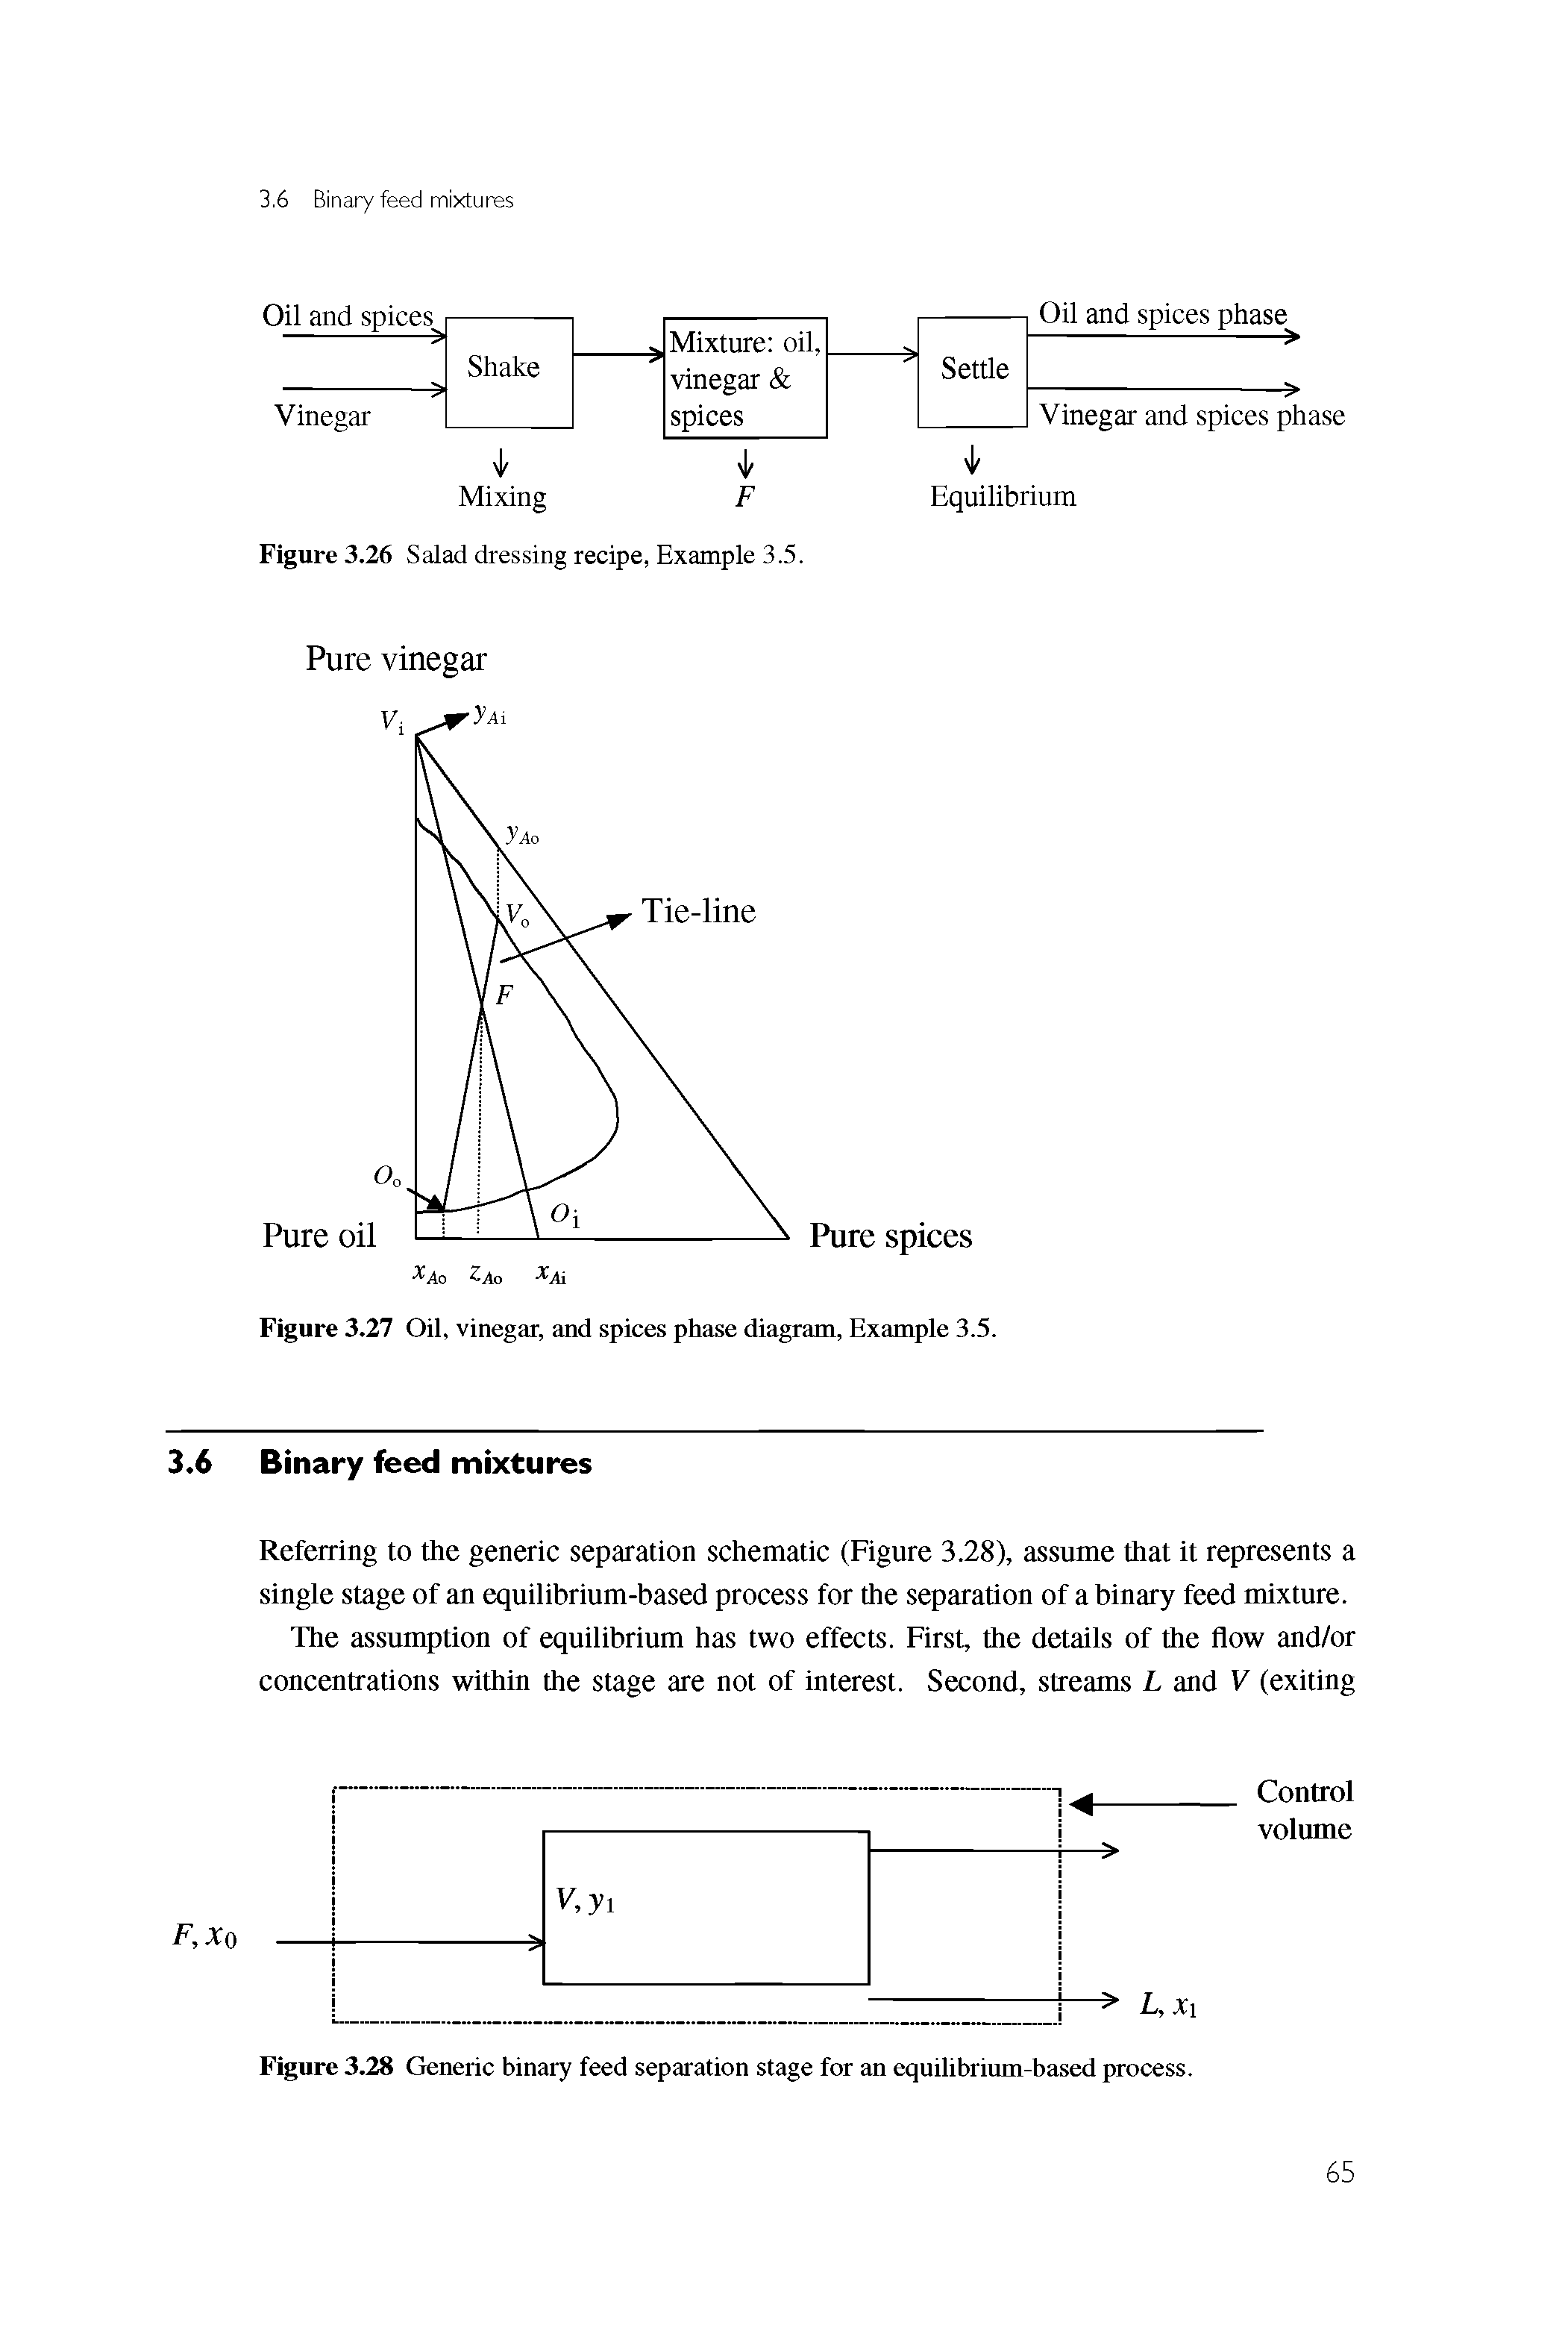 Figure 3.28 Generic binary feed separation stage for an equilibrium-based process.